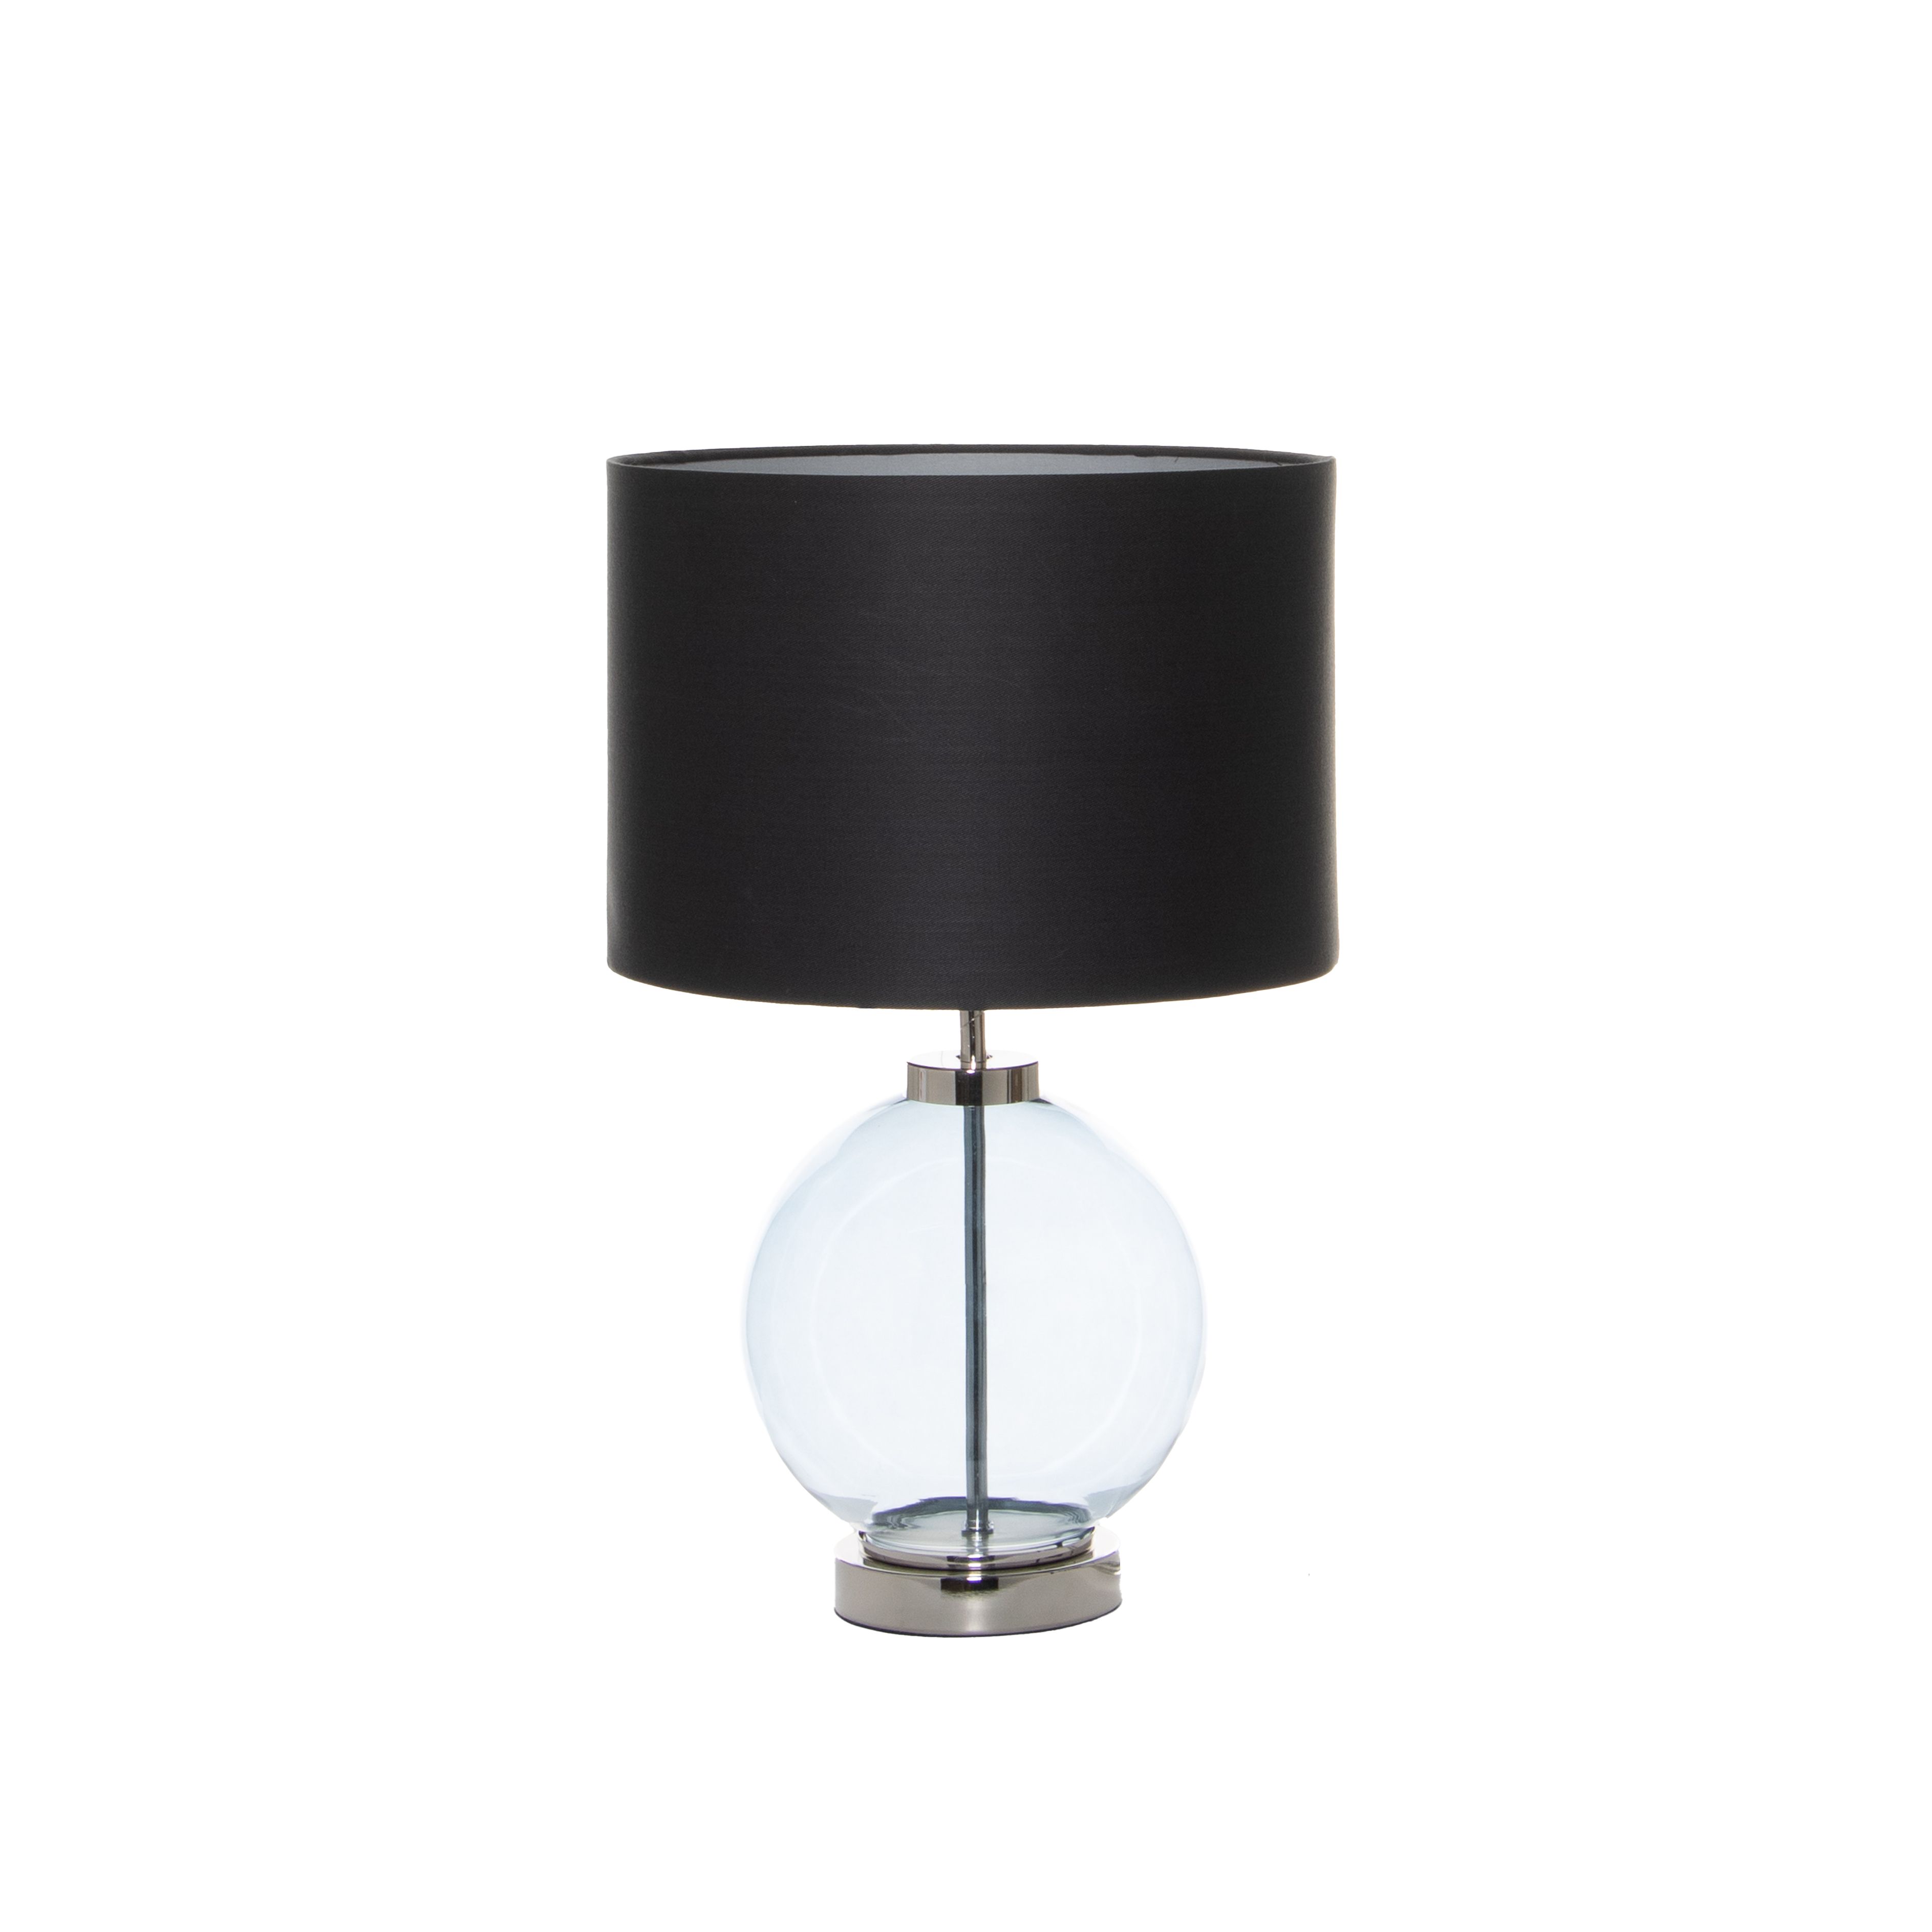 Inlight Palais Gloss Polished Nickel effect Round Table lamp